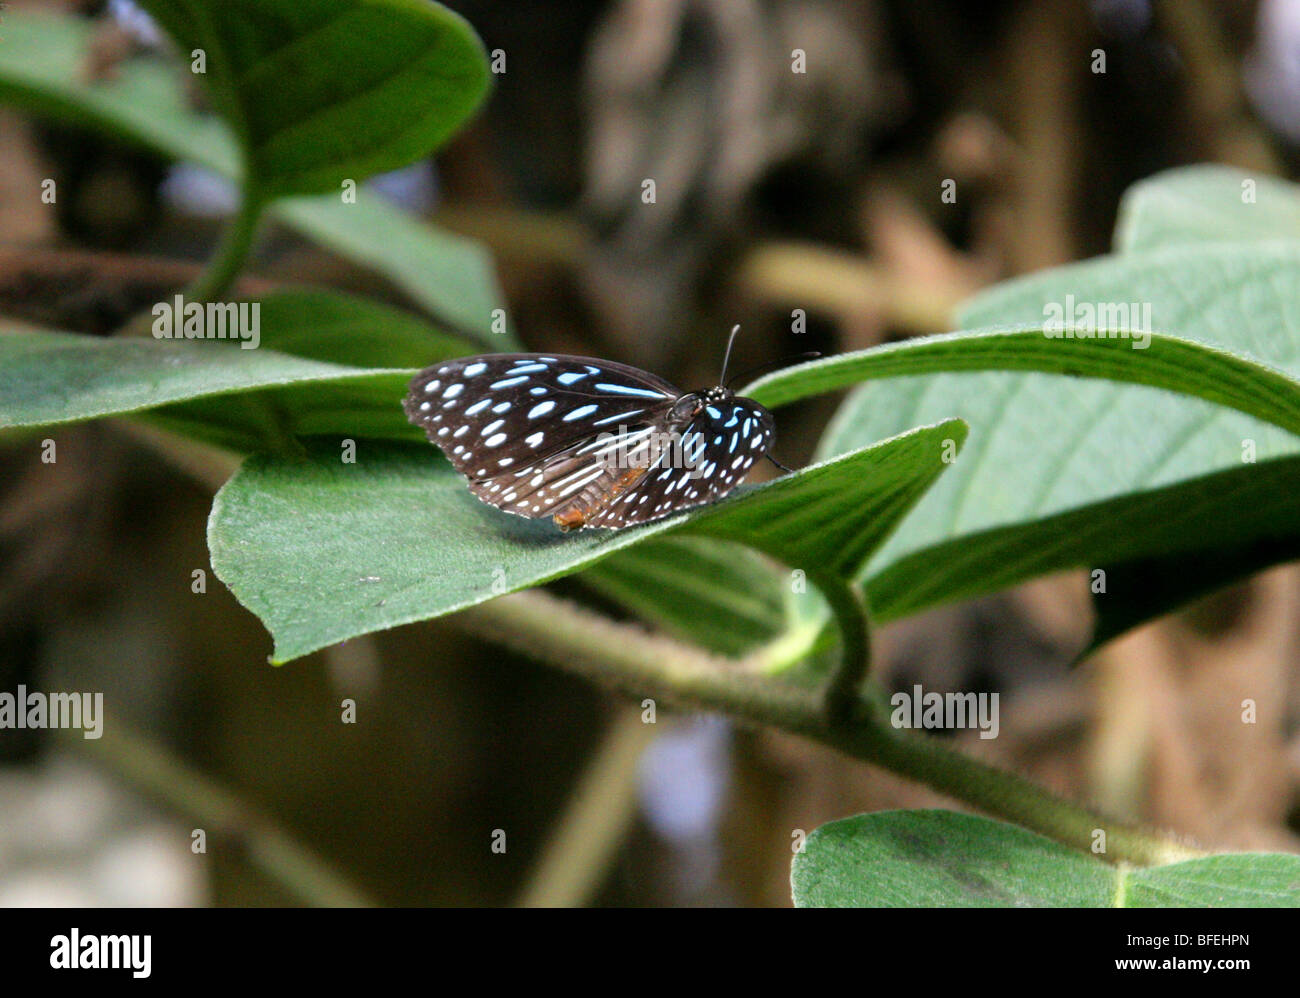 Dark Blue Tiger or Blue Glassy Tiger Butterfly, Tirumala septentrionis, Nymphalidae, South Asia Stock Photo